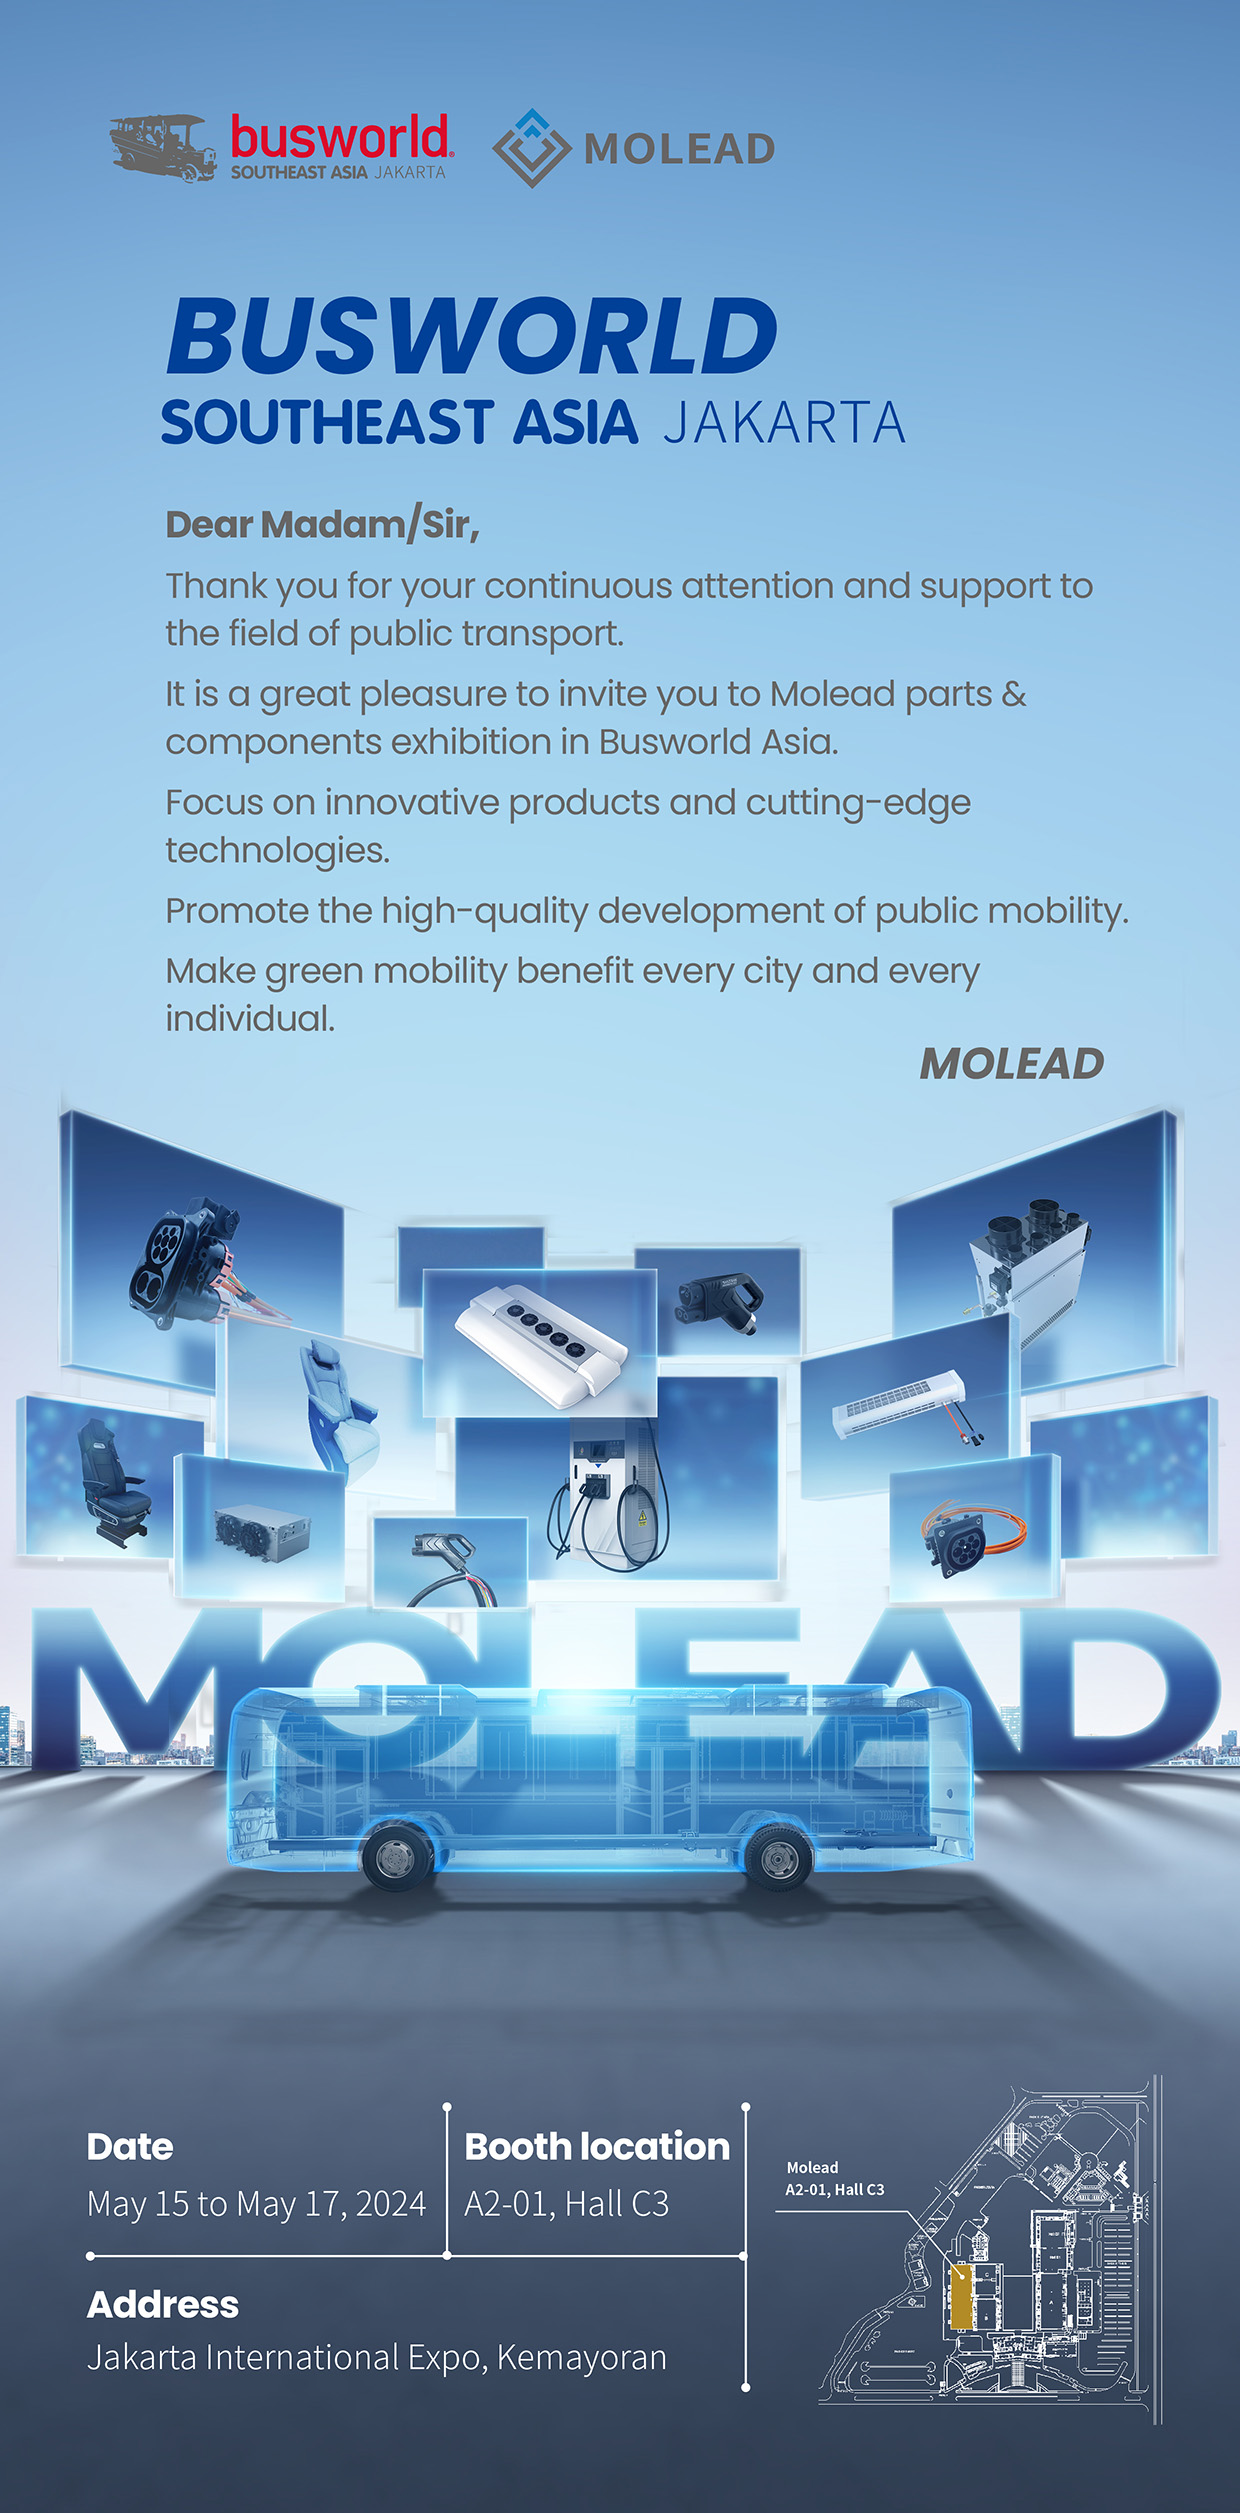 Molead will participate in the busworld exhibition in Jakarta